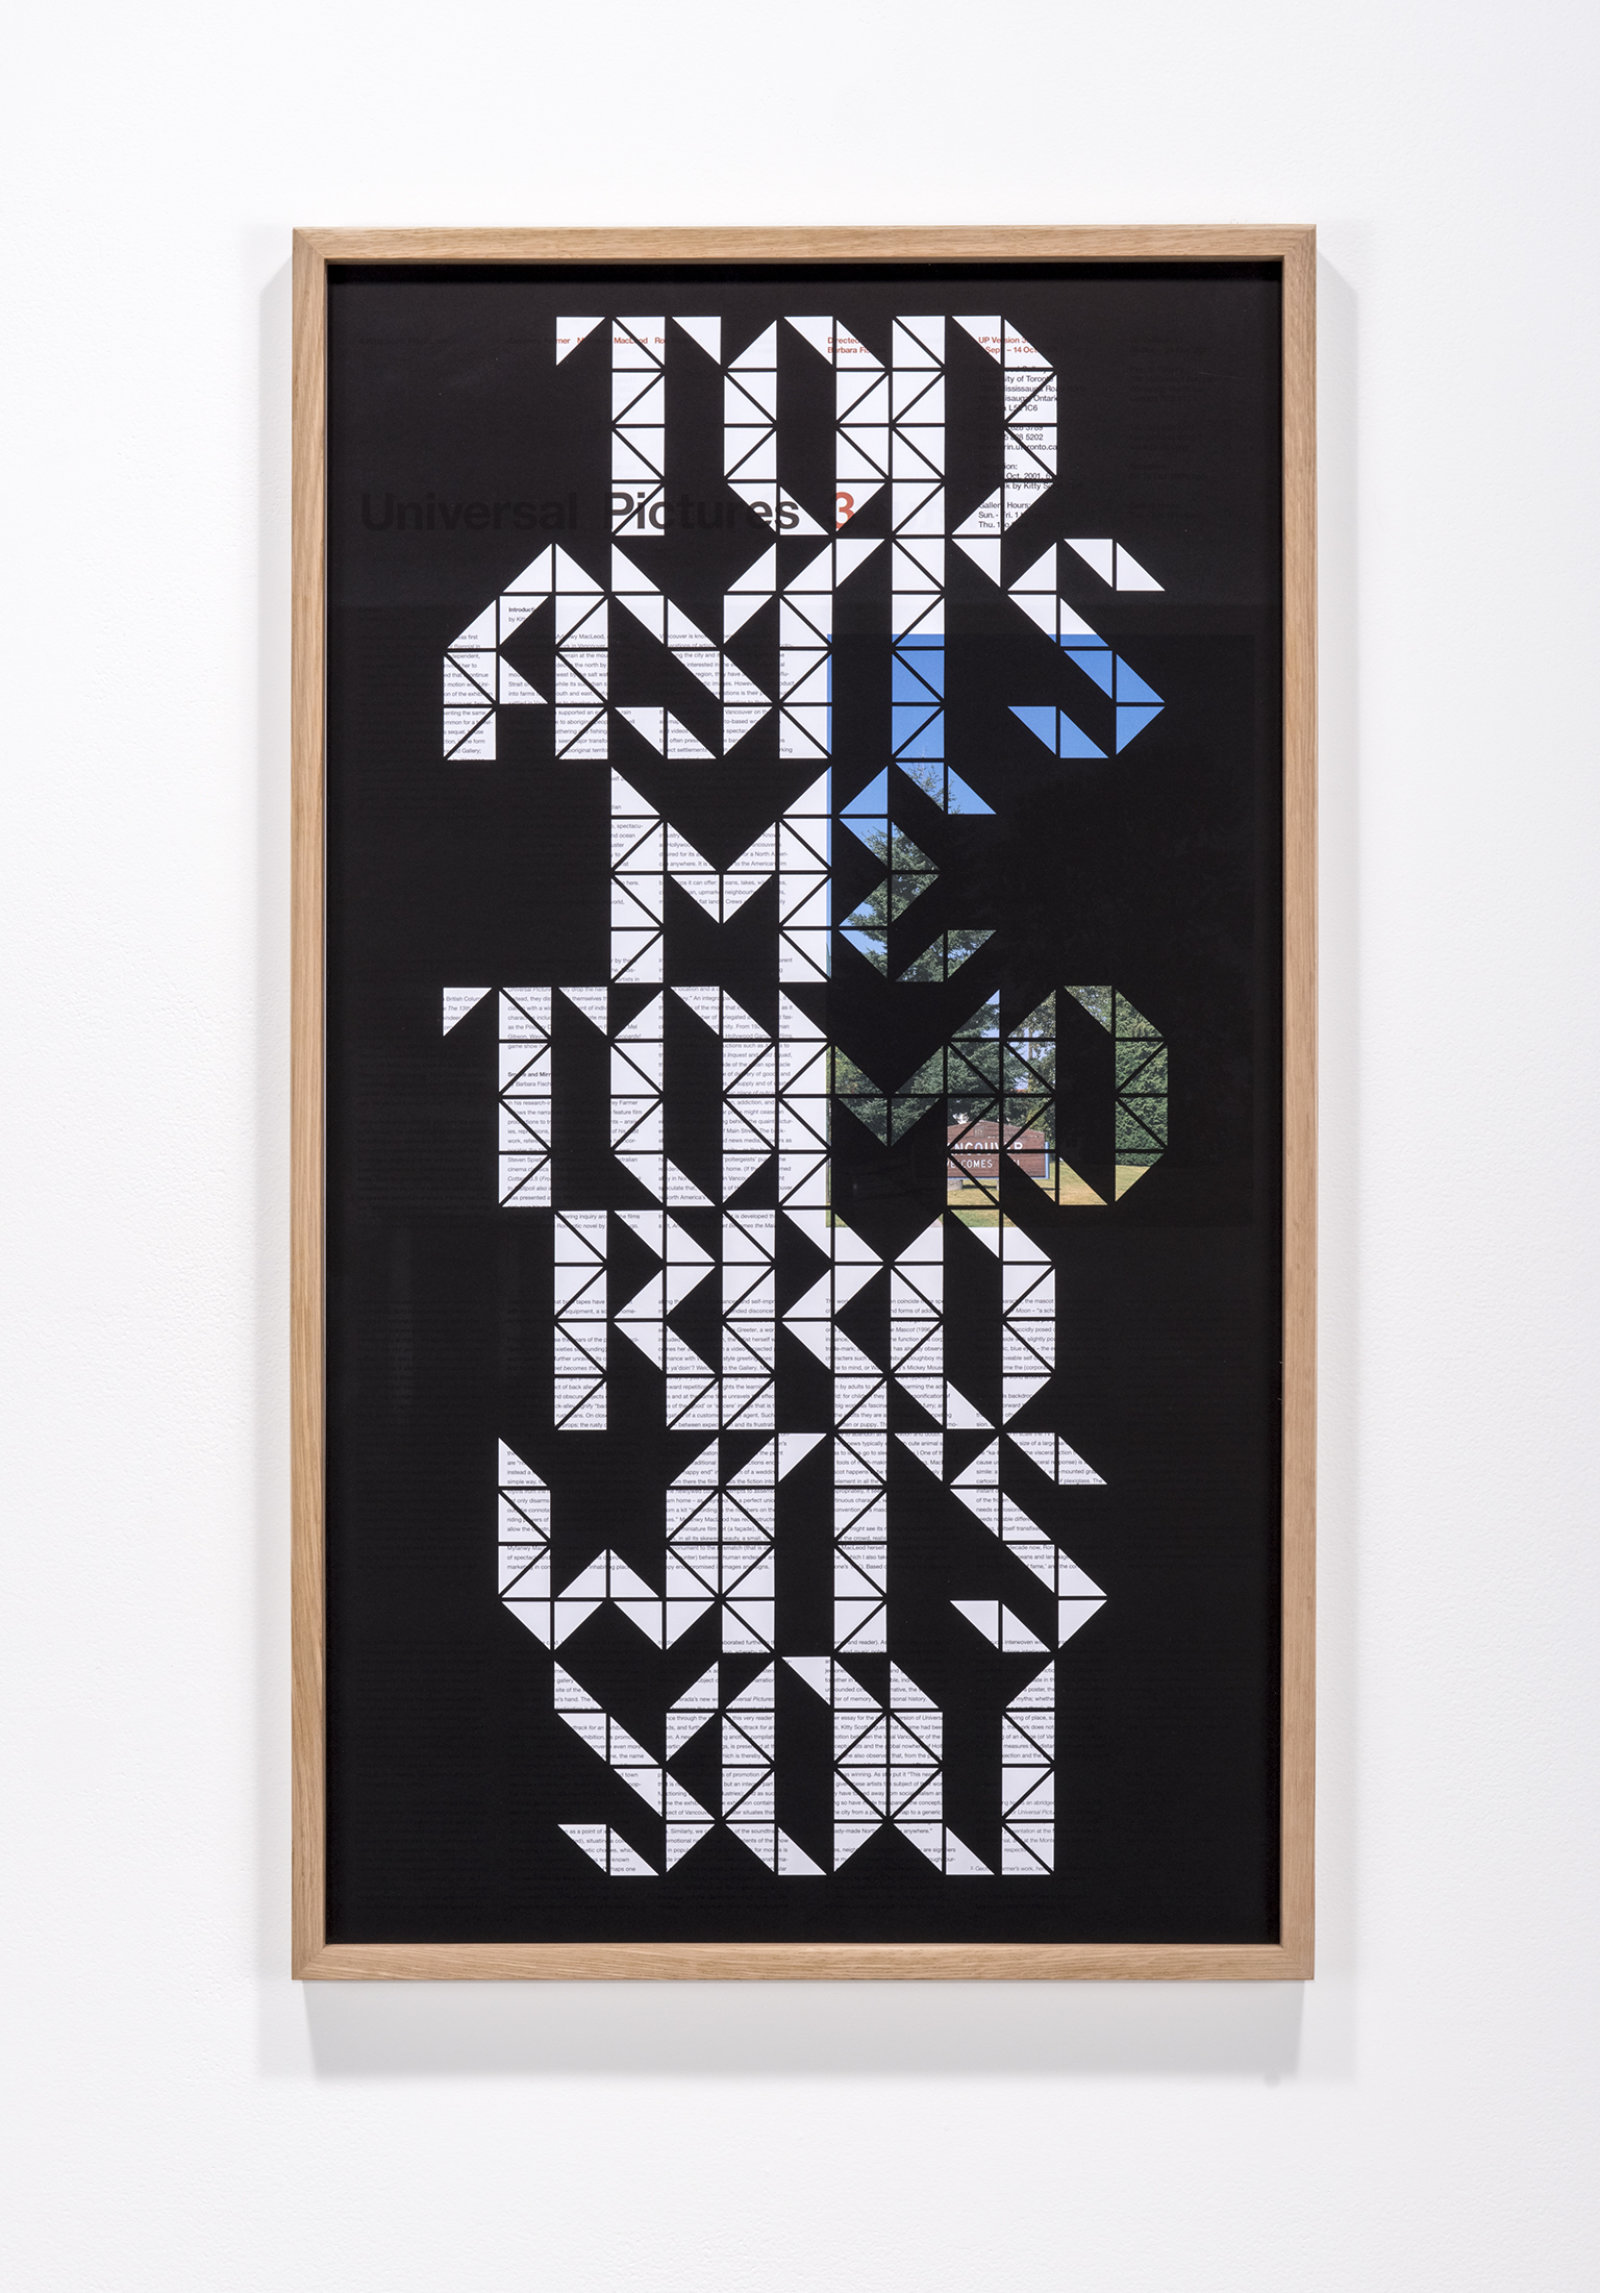 Ron Terada, TODAY ITS ME TOMORROW ITS YOU, 2015, inkjet print on offset printed poster (2001), 35 x 20 in. (89 x 51 cm)